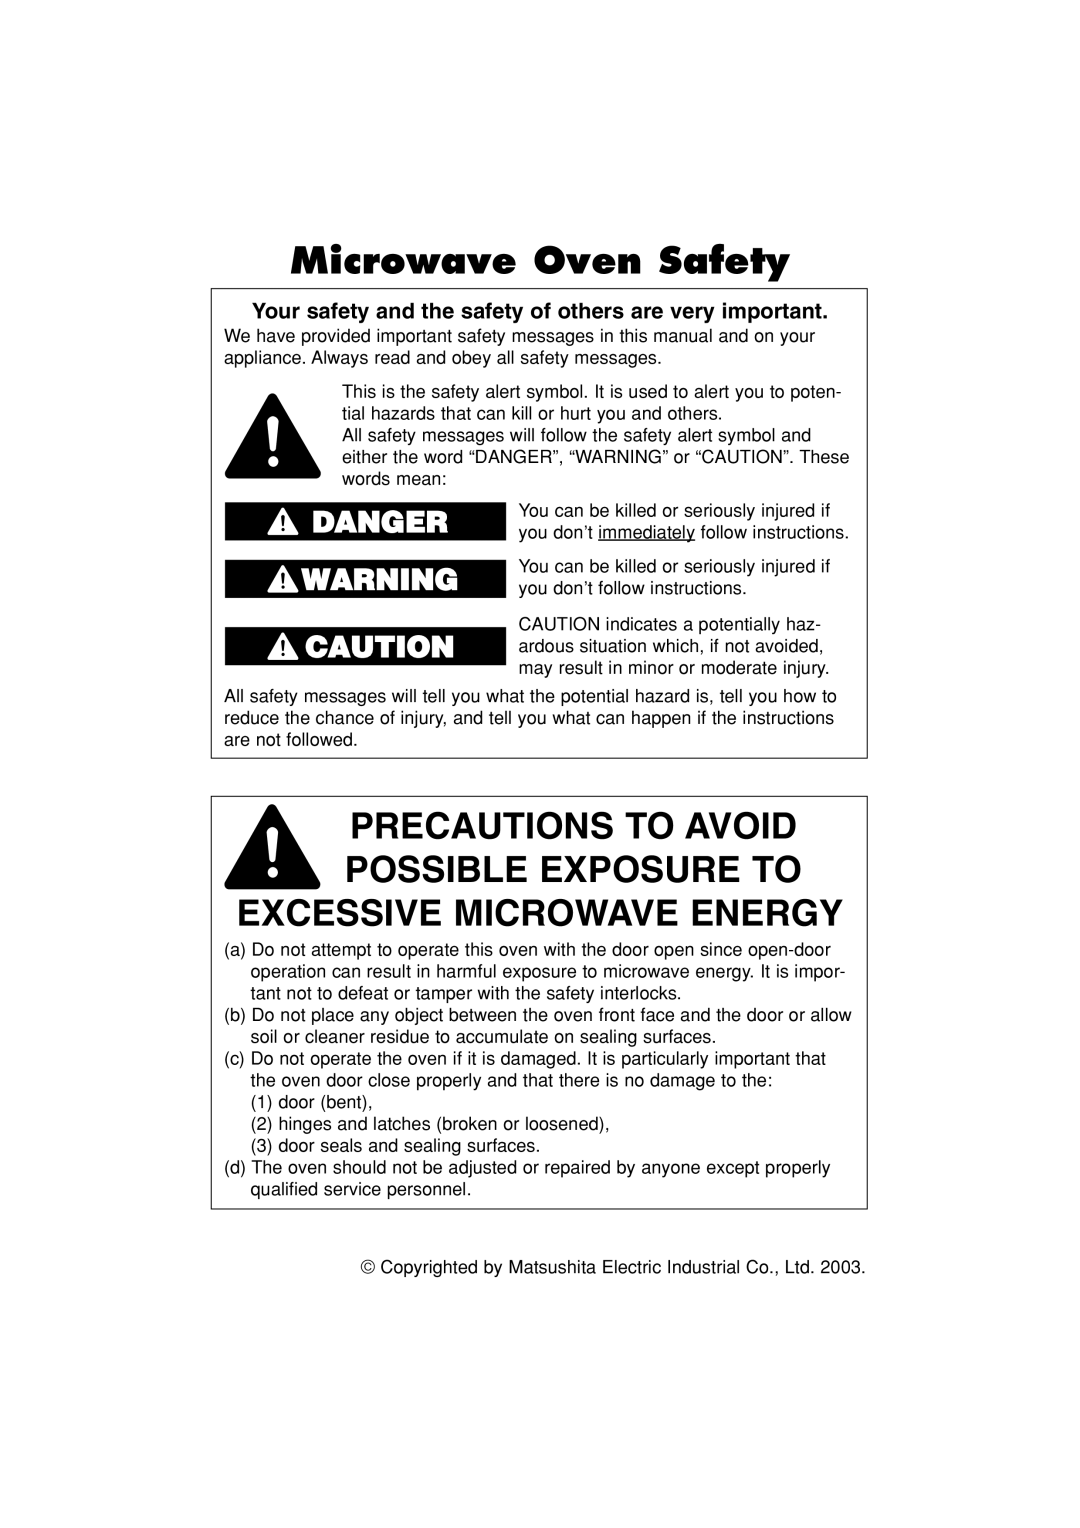 Panasonic NN-S553 Precautions To Avoid, Possible Exposure To Excessive Microwave Energy, Microwave Oven Safety, Danger 